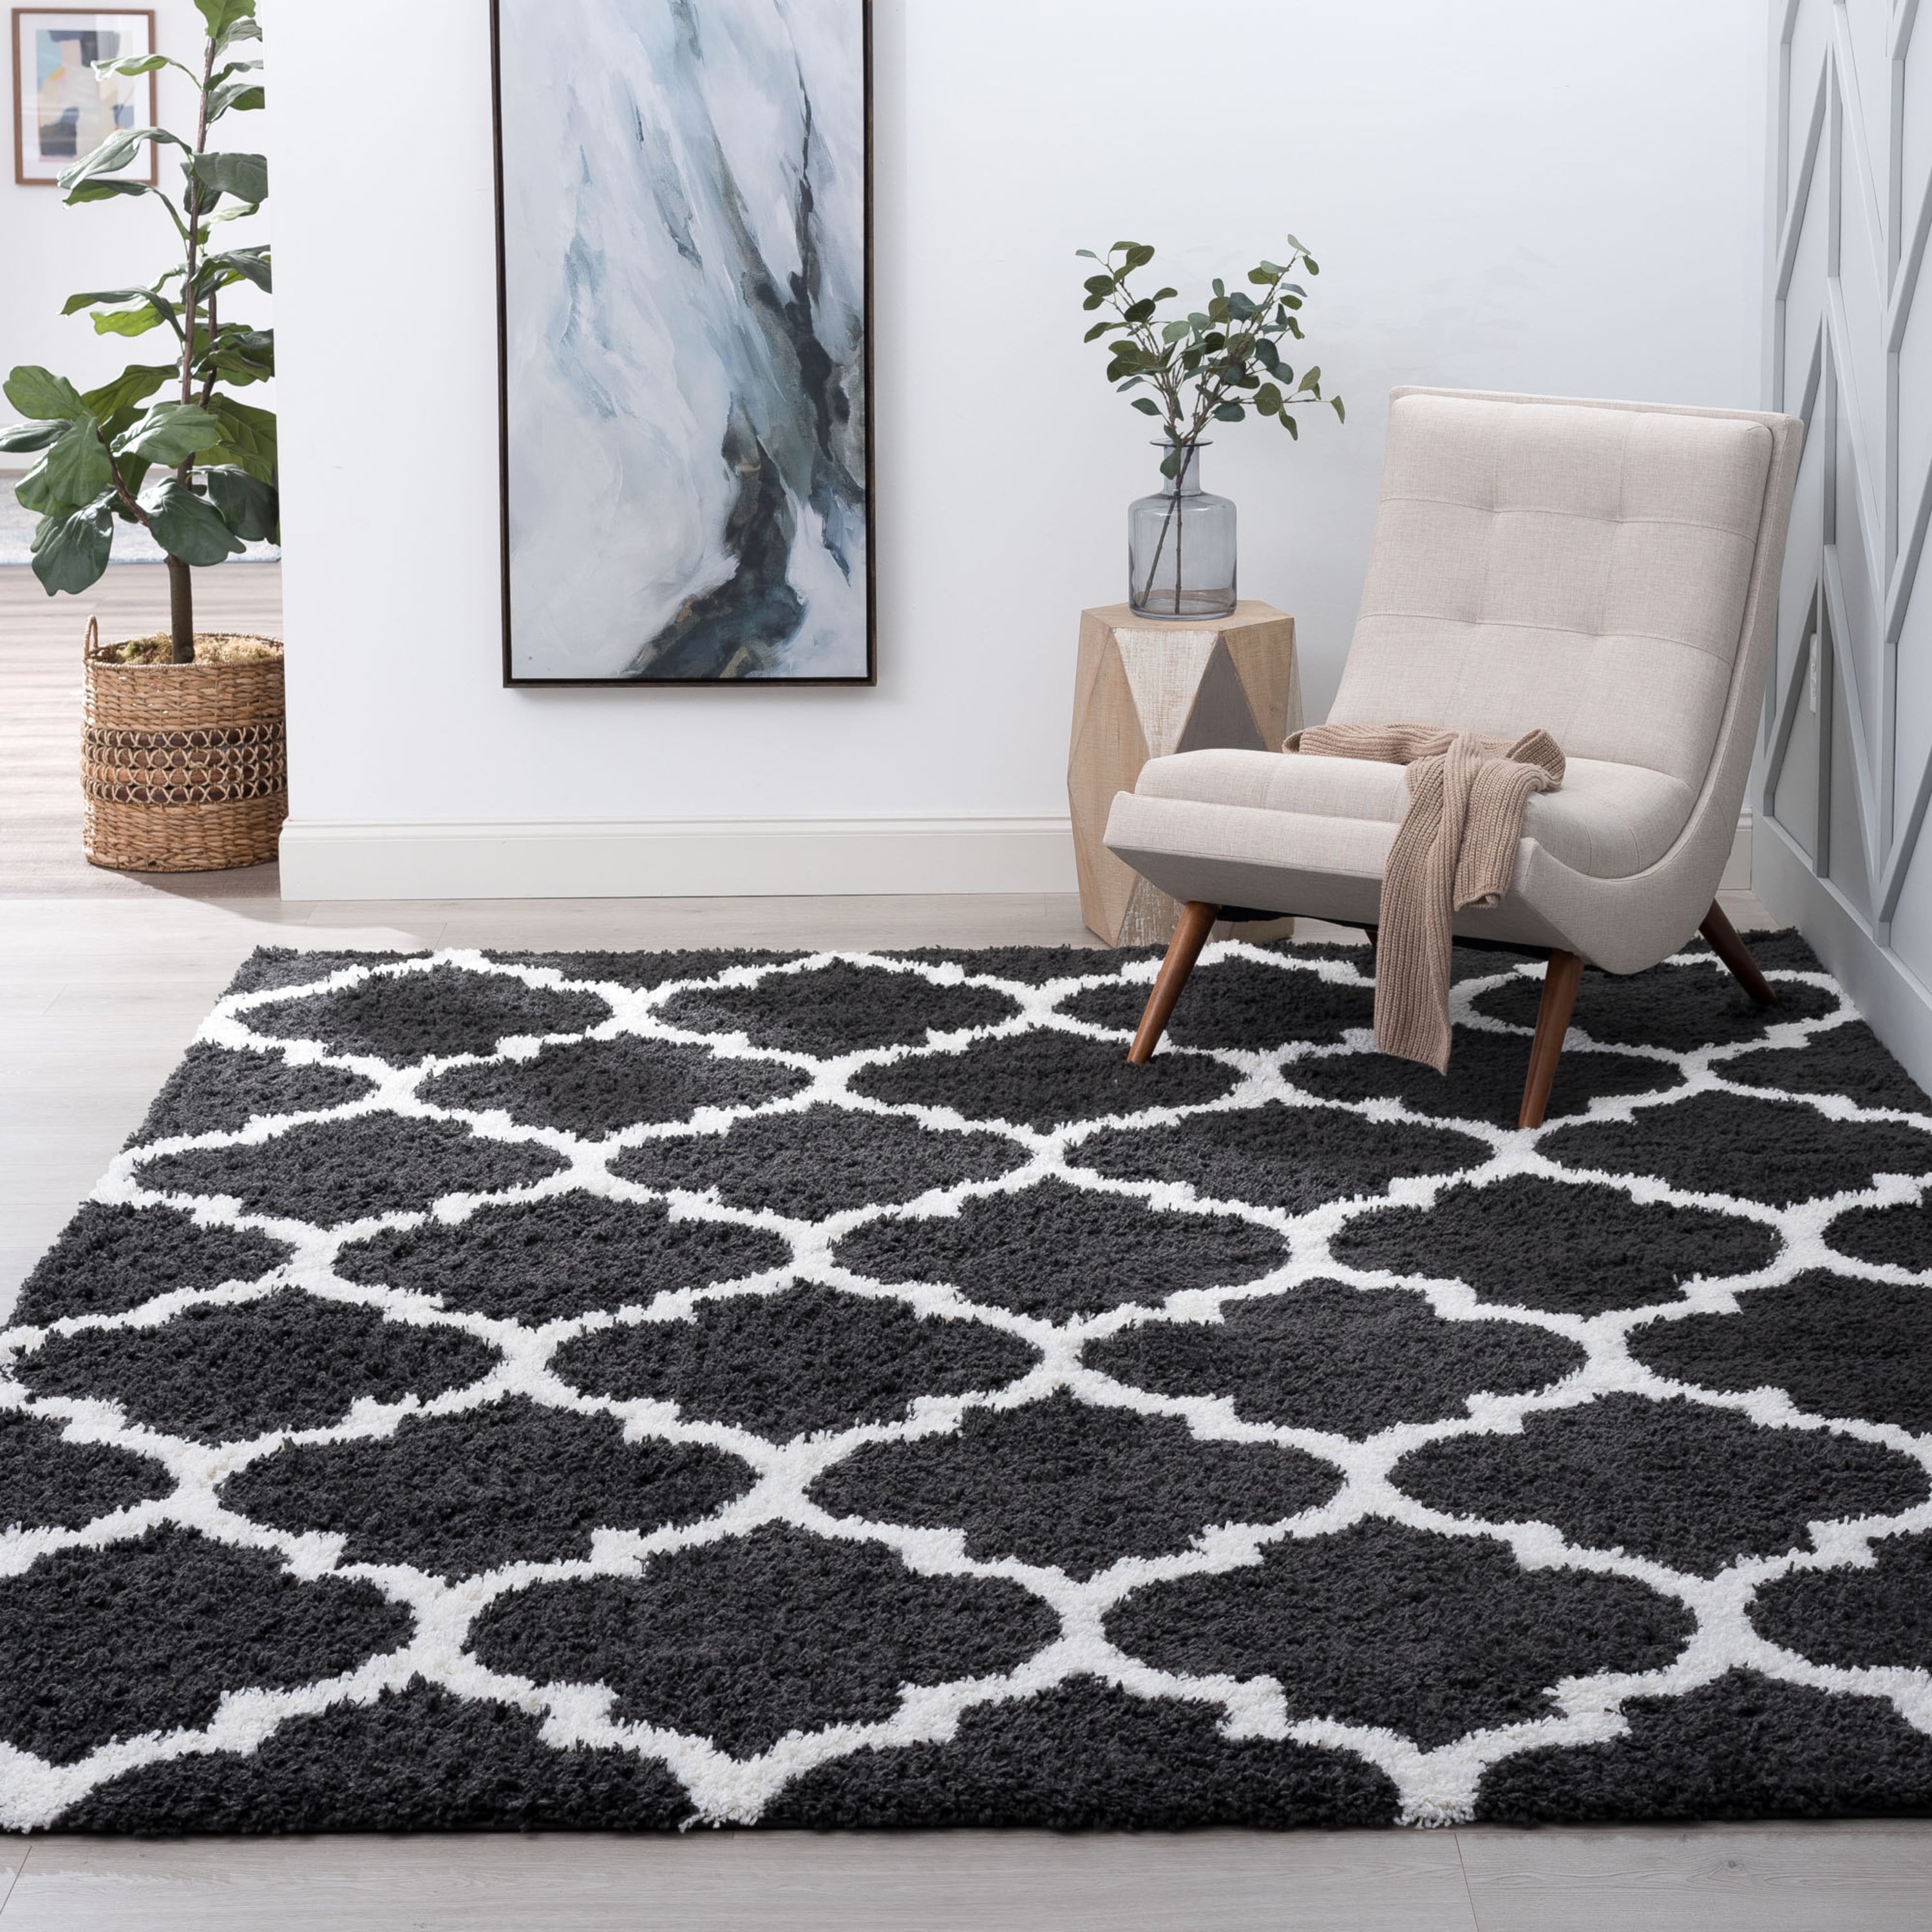 Grey Geometric Moroccan Tile Living Room Rugs Ivory Soft Modern Silver Area Mats 